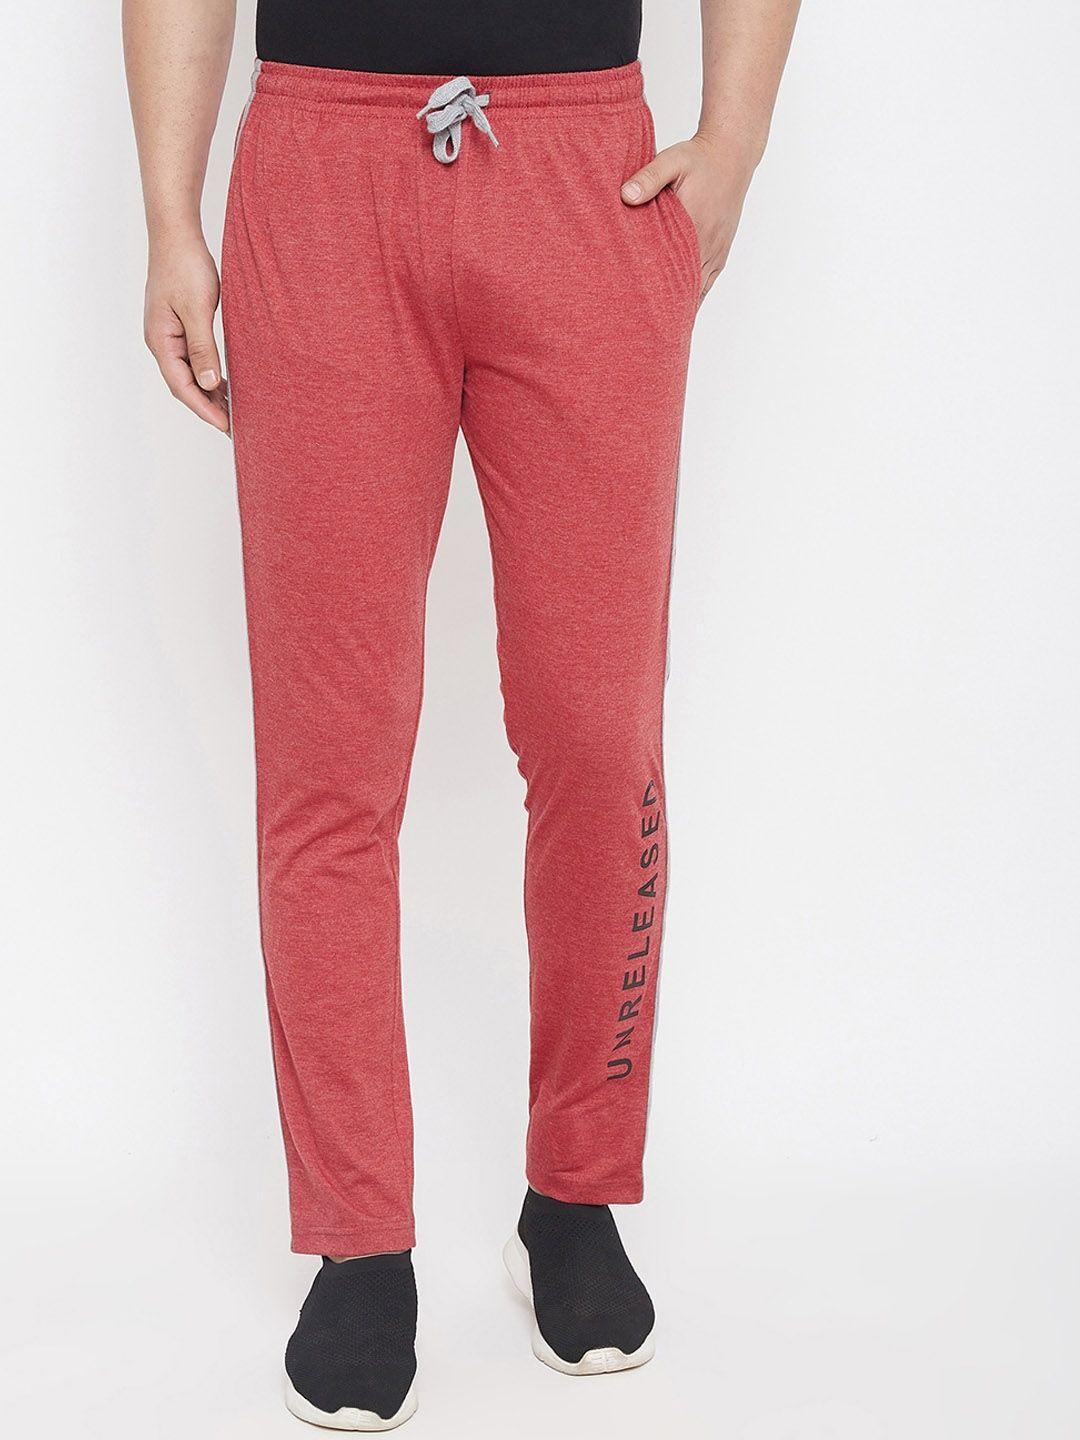 adobe-men-coral-pink-solid-straight-fit-track-pants